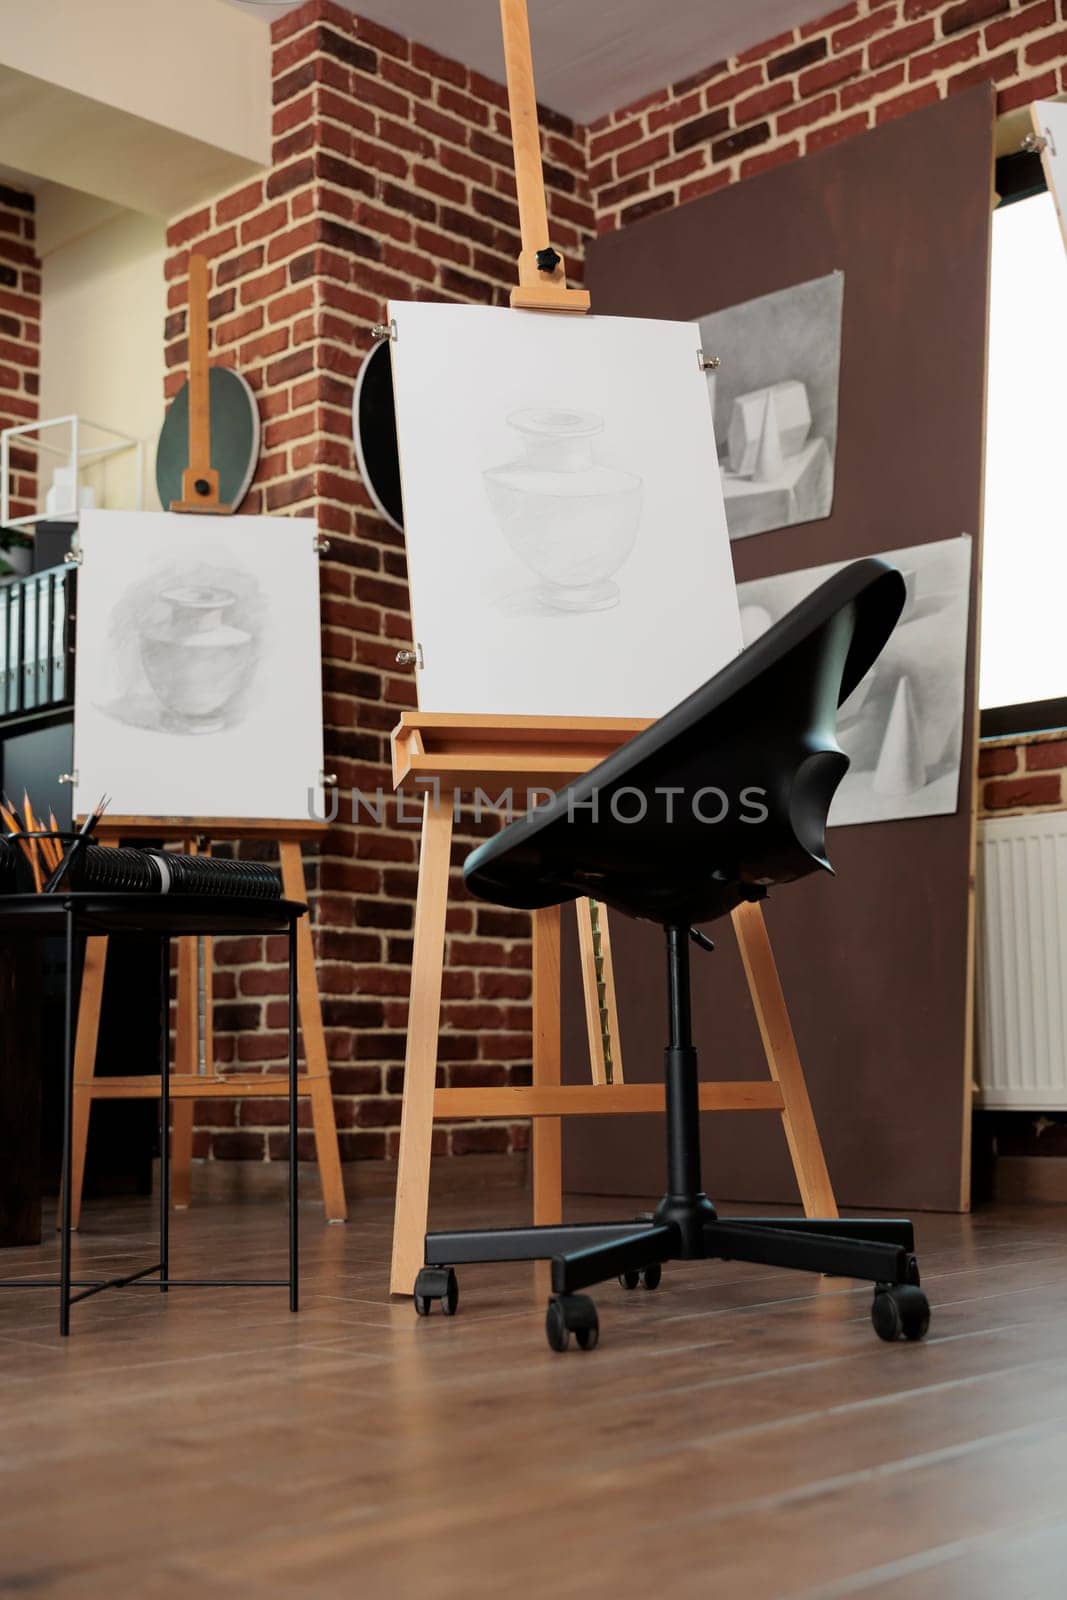 Art classroom interior with easels and drawing tools, nobody. Sketching classes and workshops in fine art for adults, sketch artworks in empty artist studio. Hobby to develop creativity